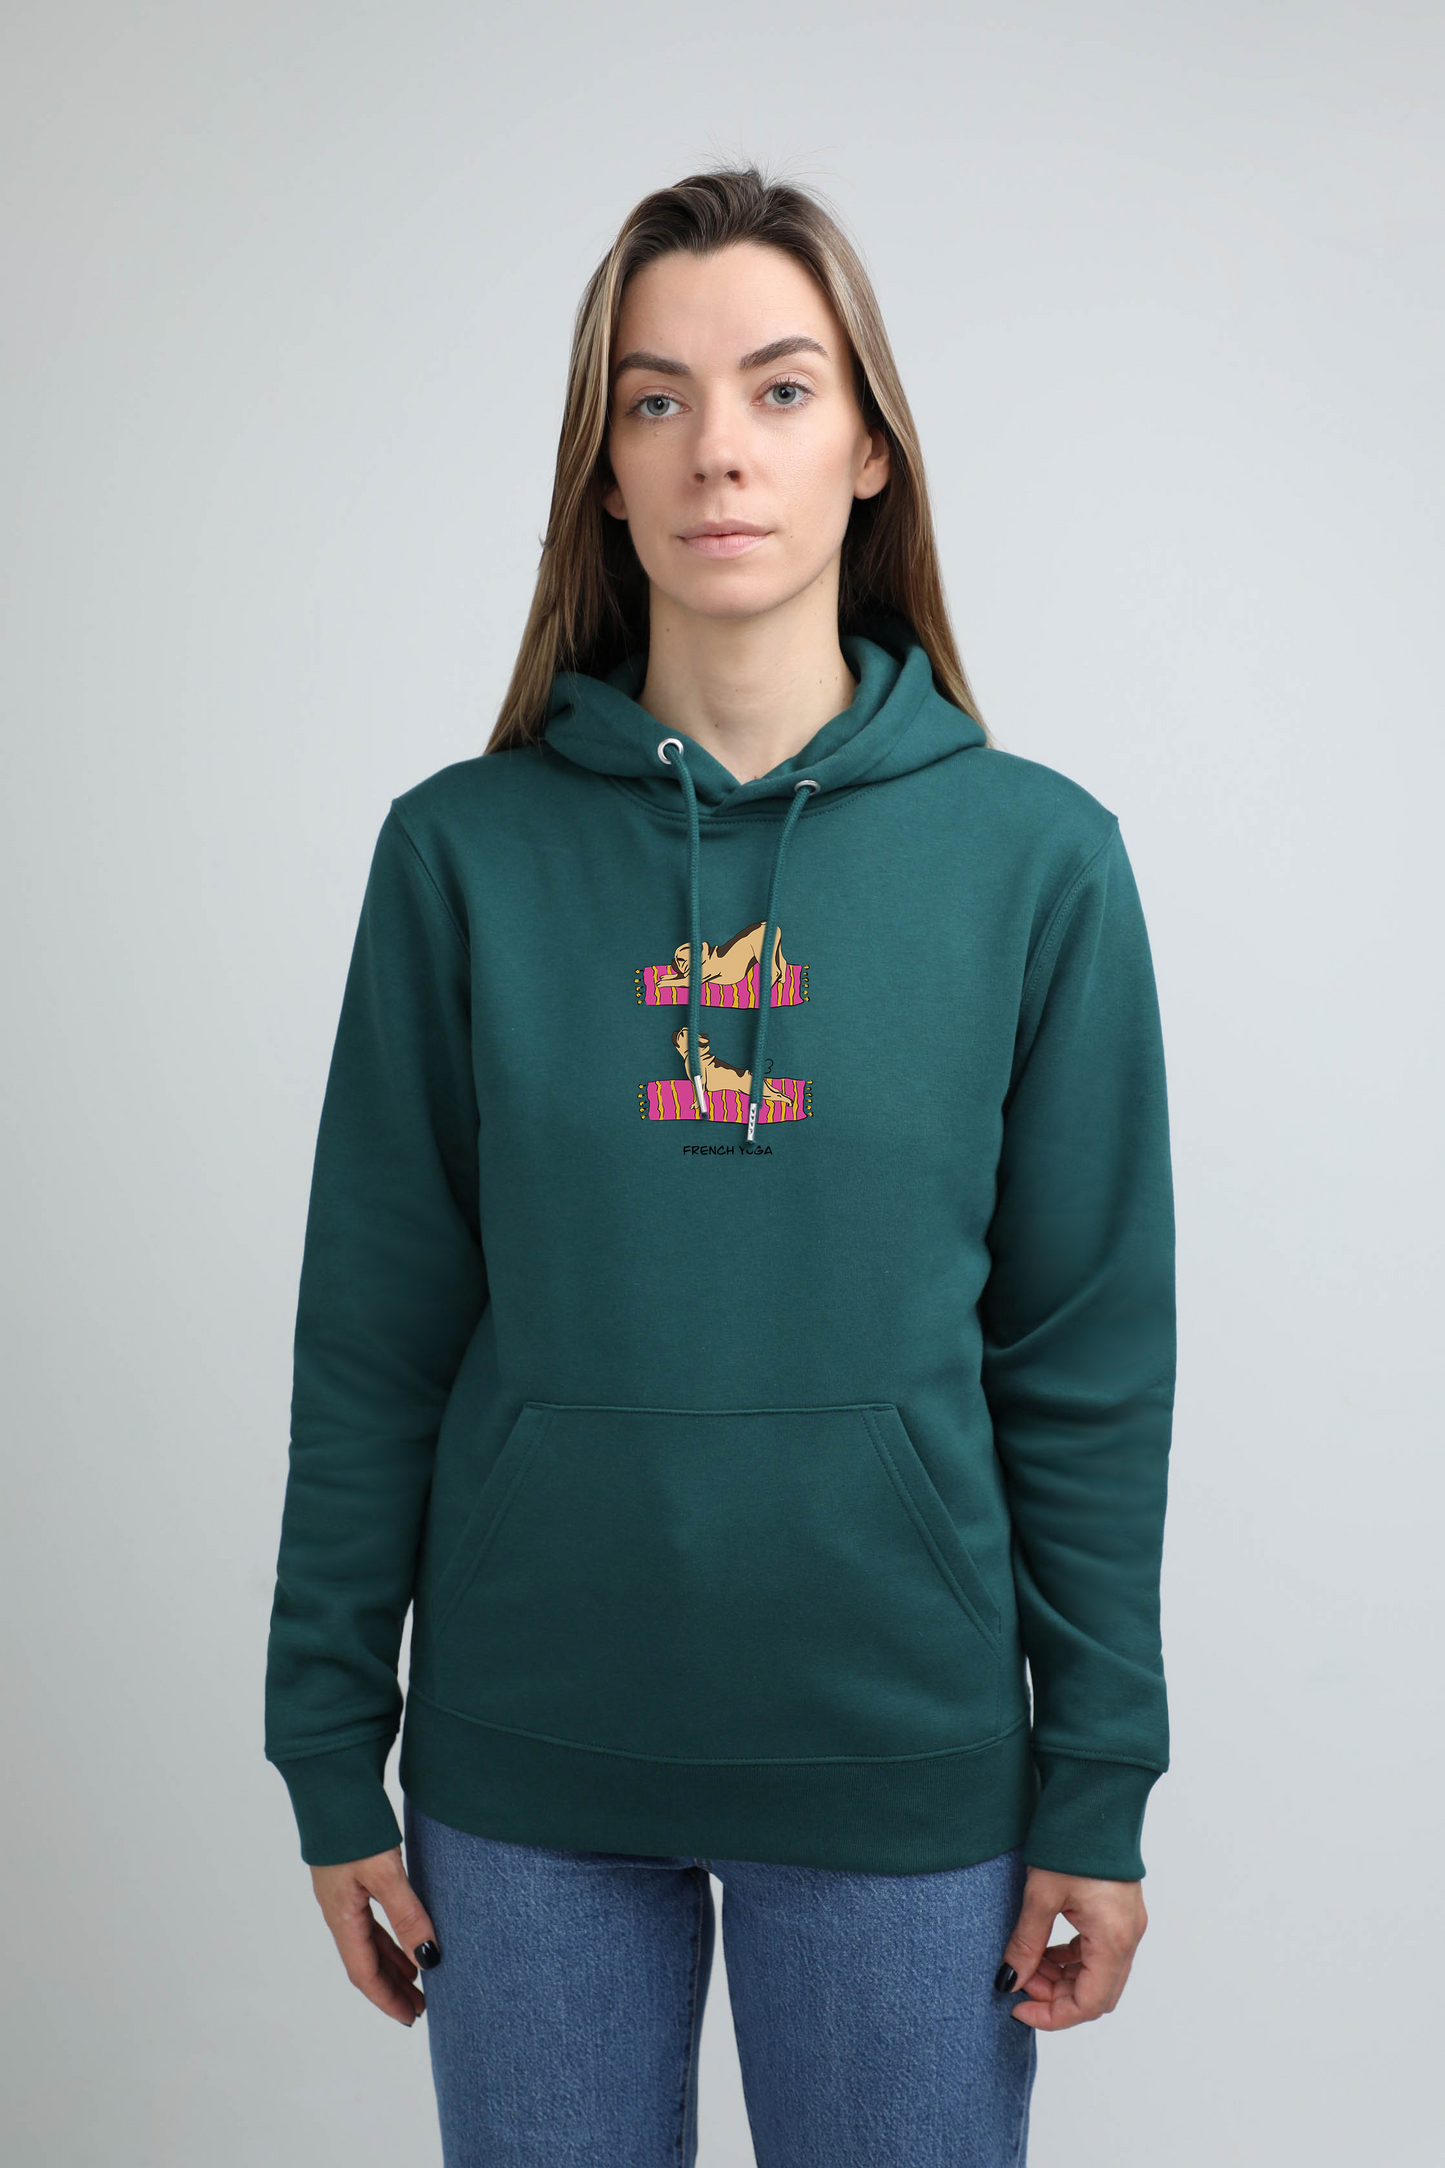 Yoga dog | Hoodie with dog. Regular fit | Unisex by My Wild Other